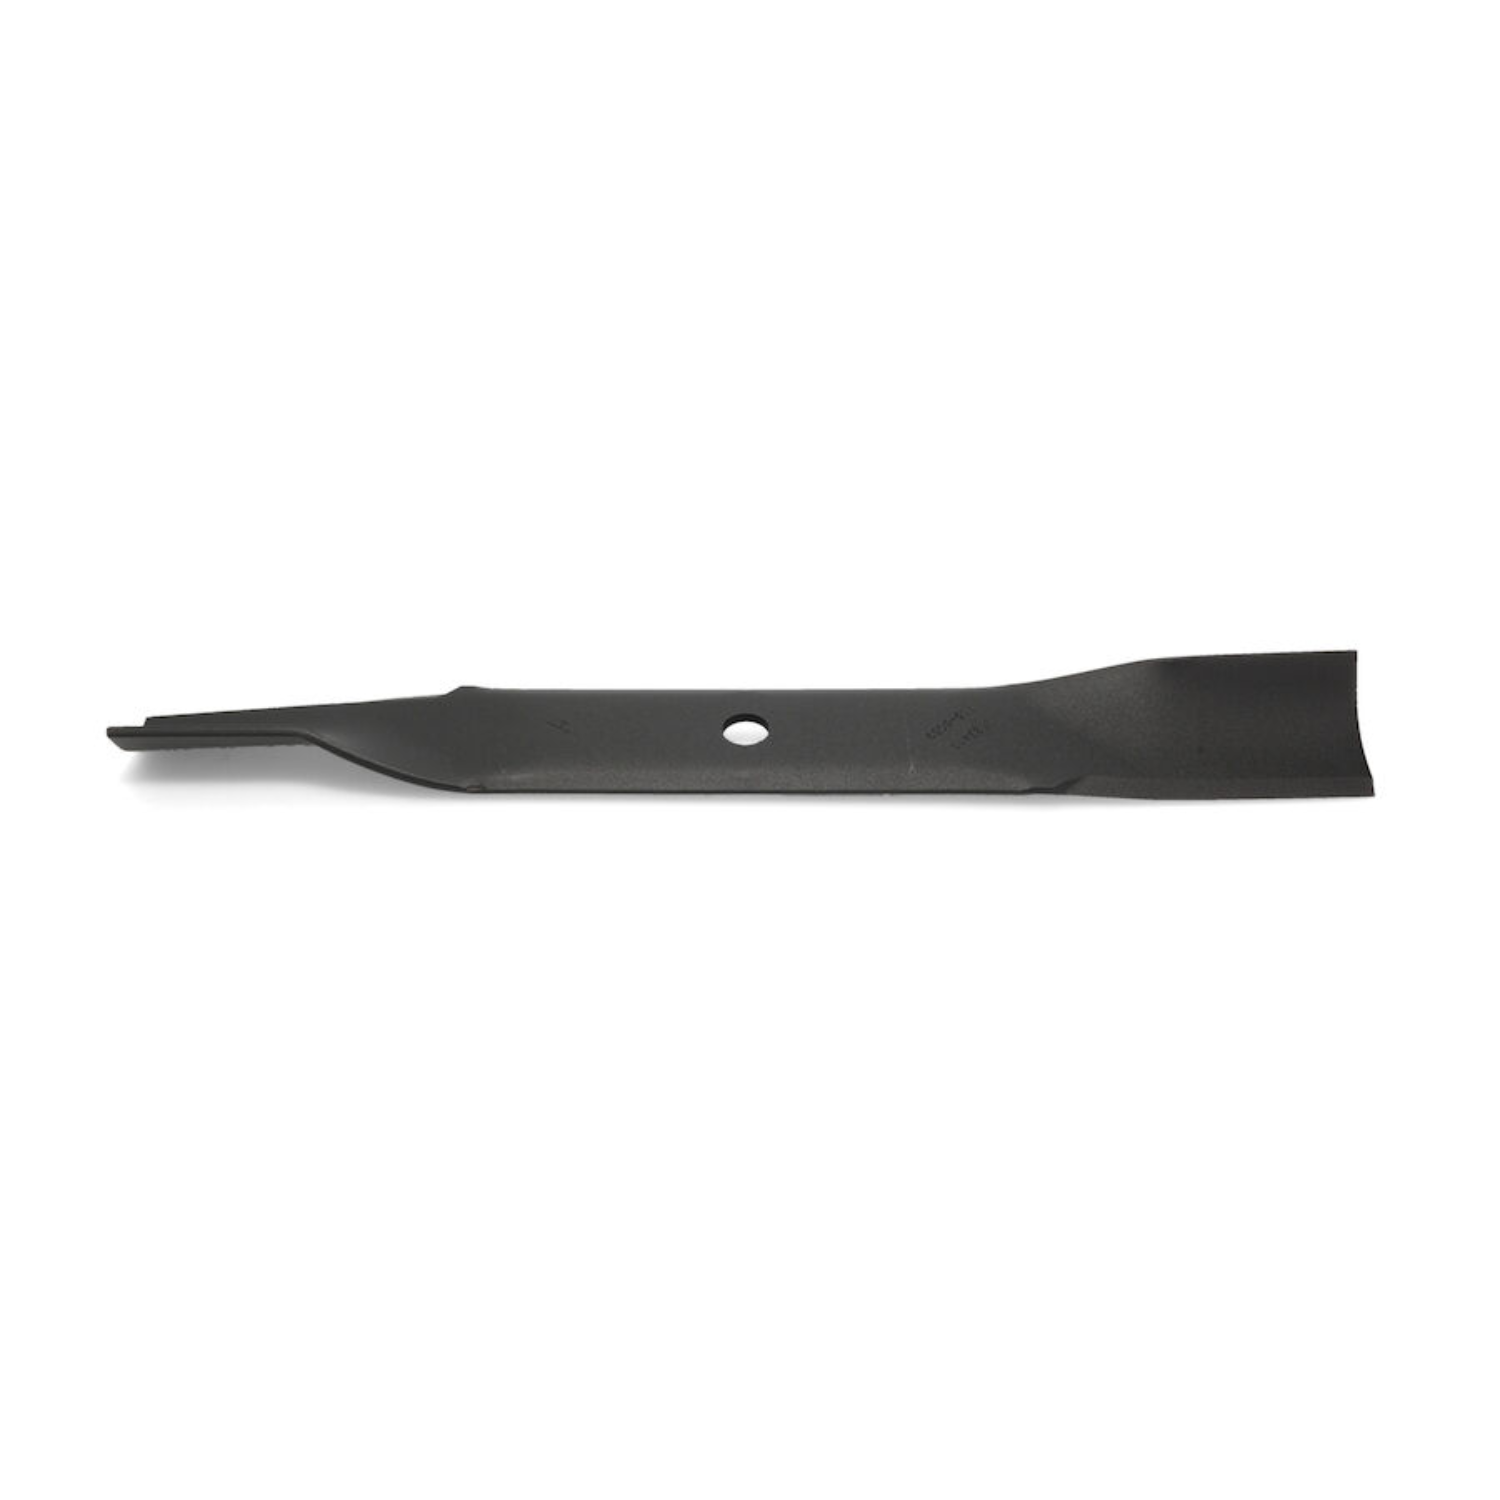 Toro 17.5 Inch Replacement Blade for TimeCutter Mower 115-5059-03